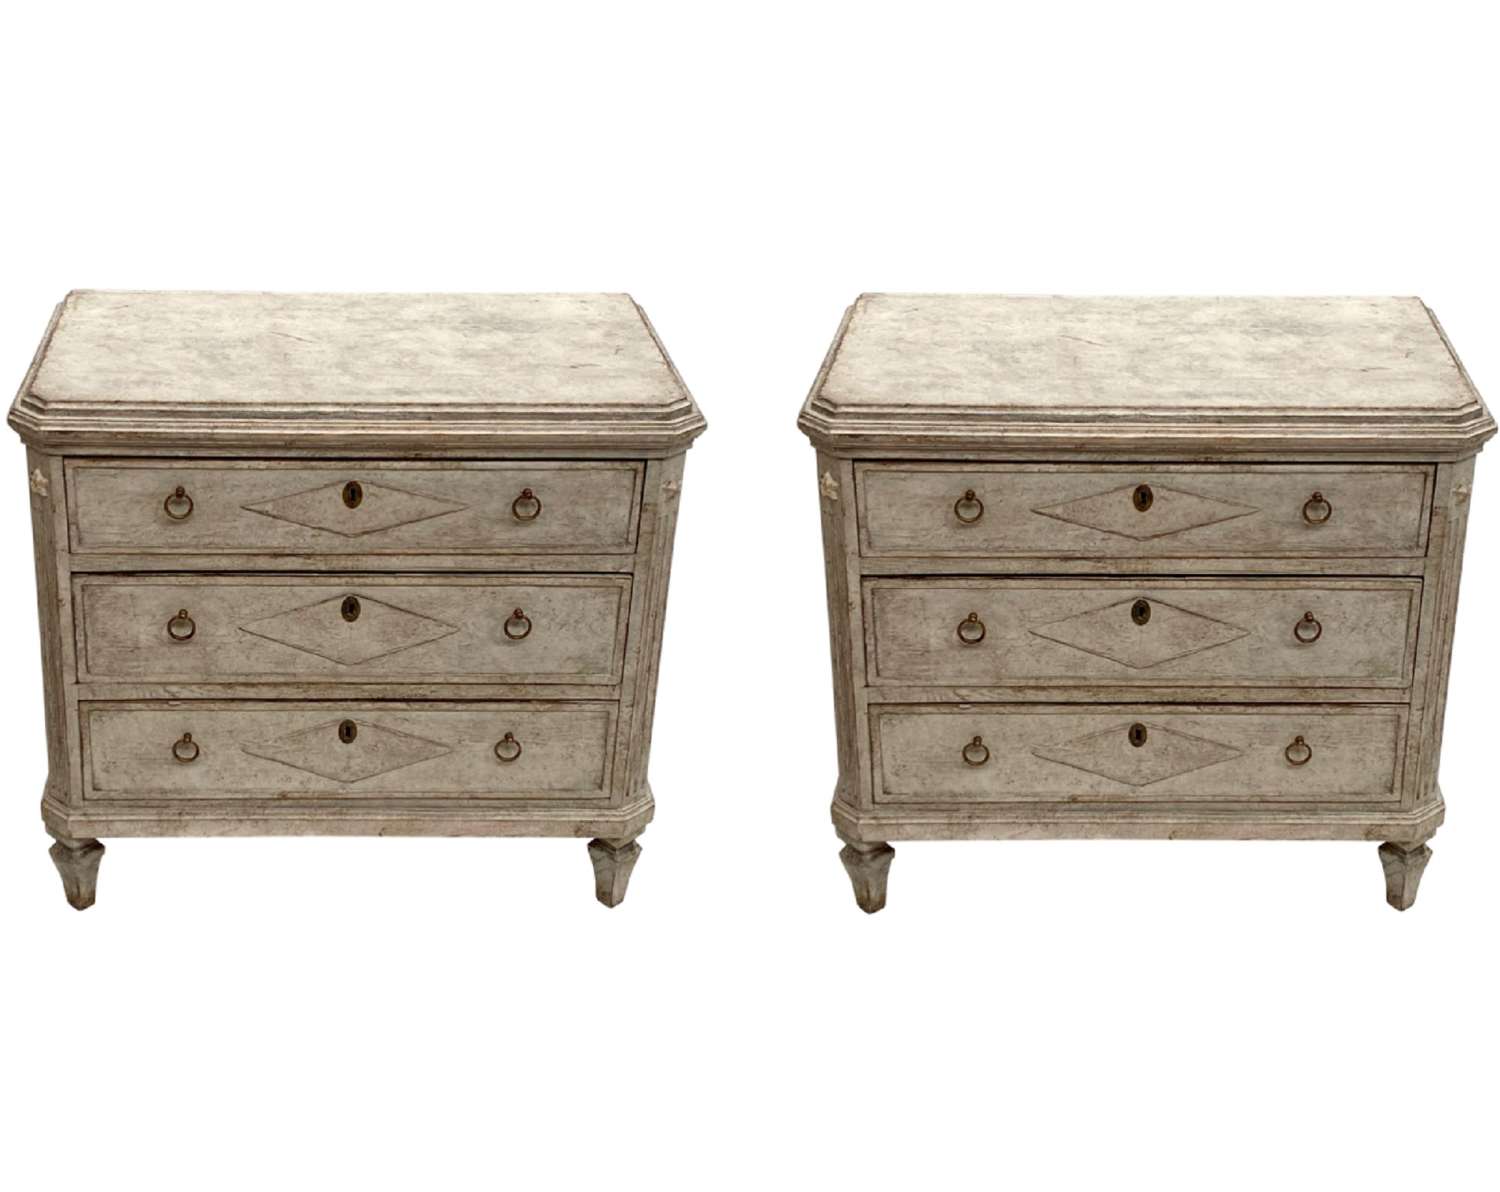 A pair of swedish painted commodes